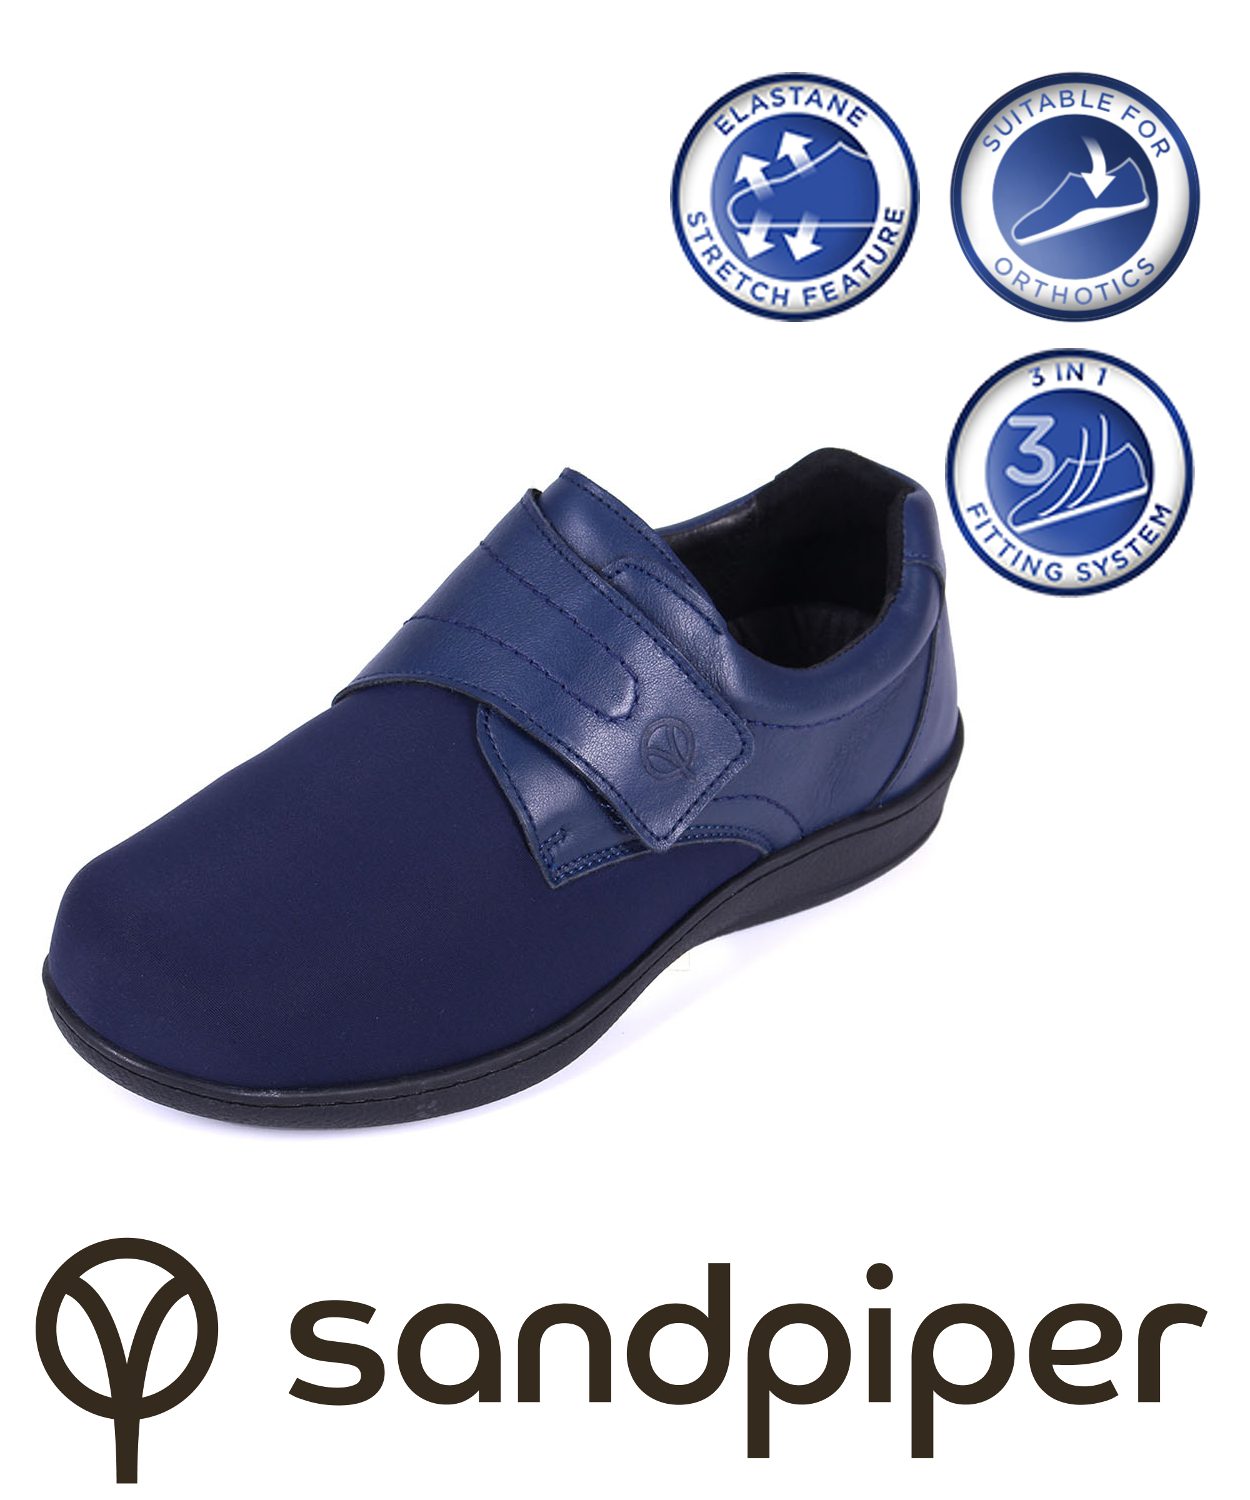 sandpipers shoes